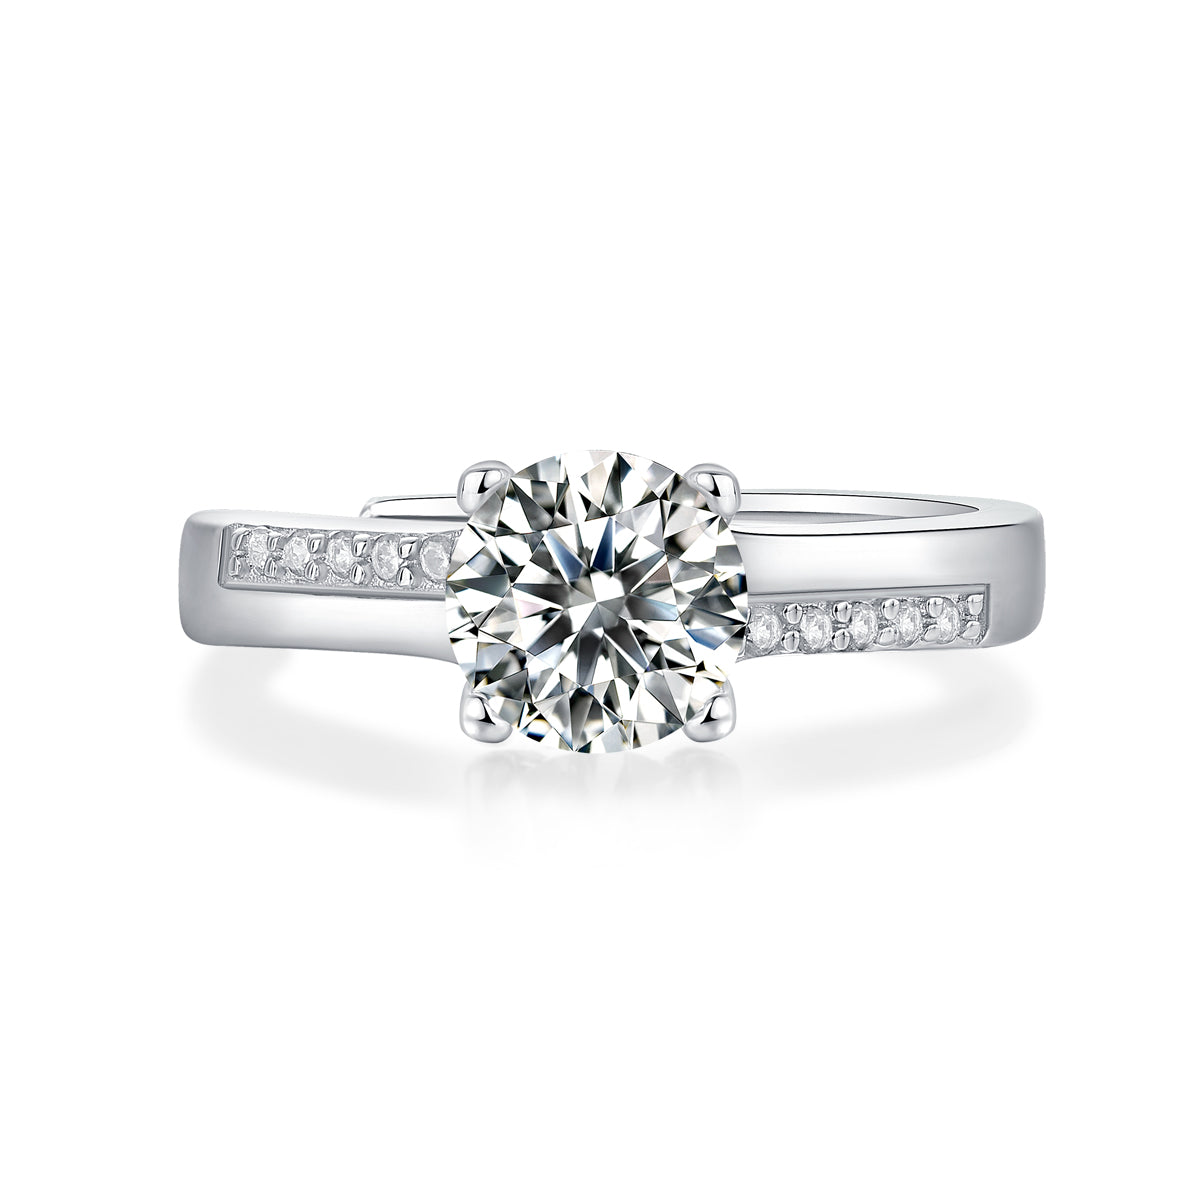 Moissanite lab-grown Diamond Engagement Ring for women - 18K White Gold Plated S925 Sterling Silver - Well of Wishes - 4